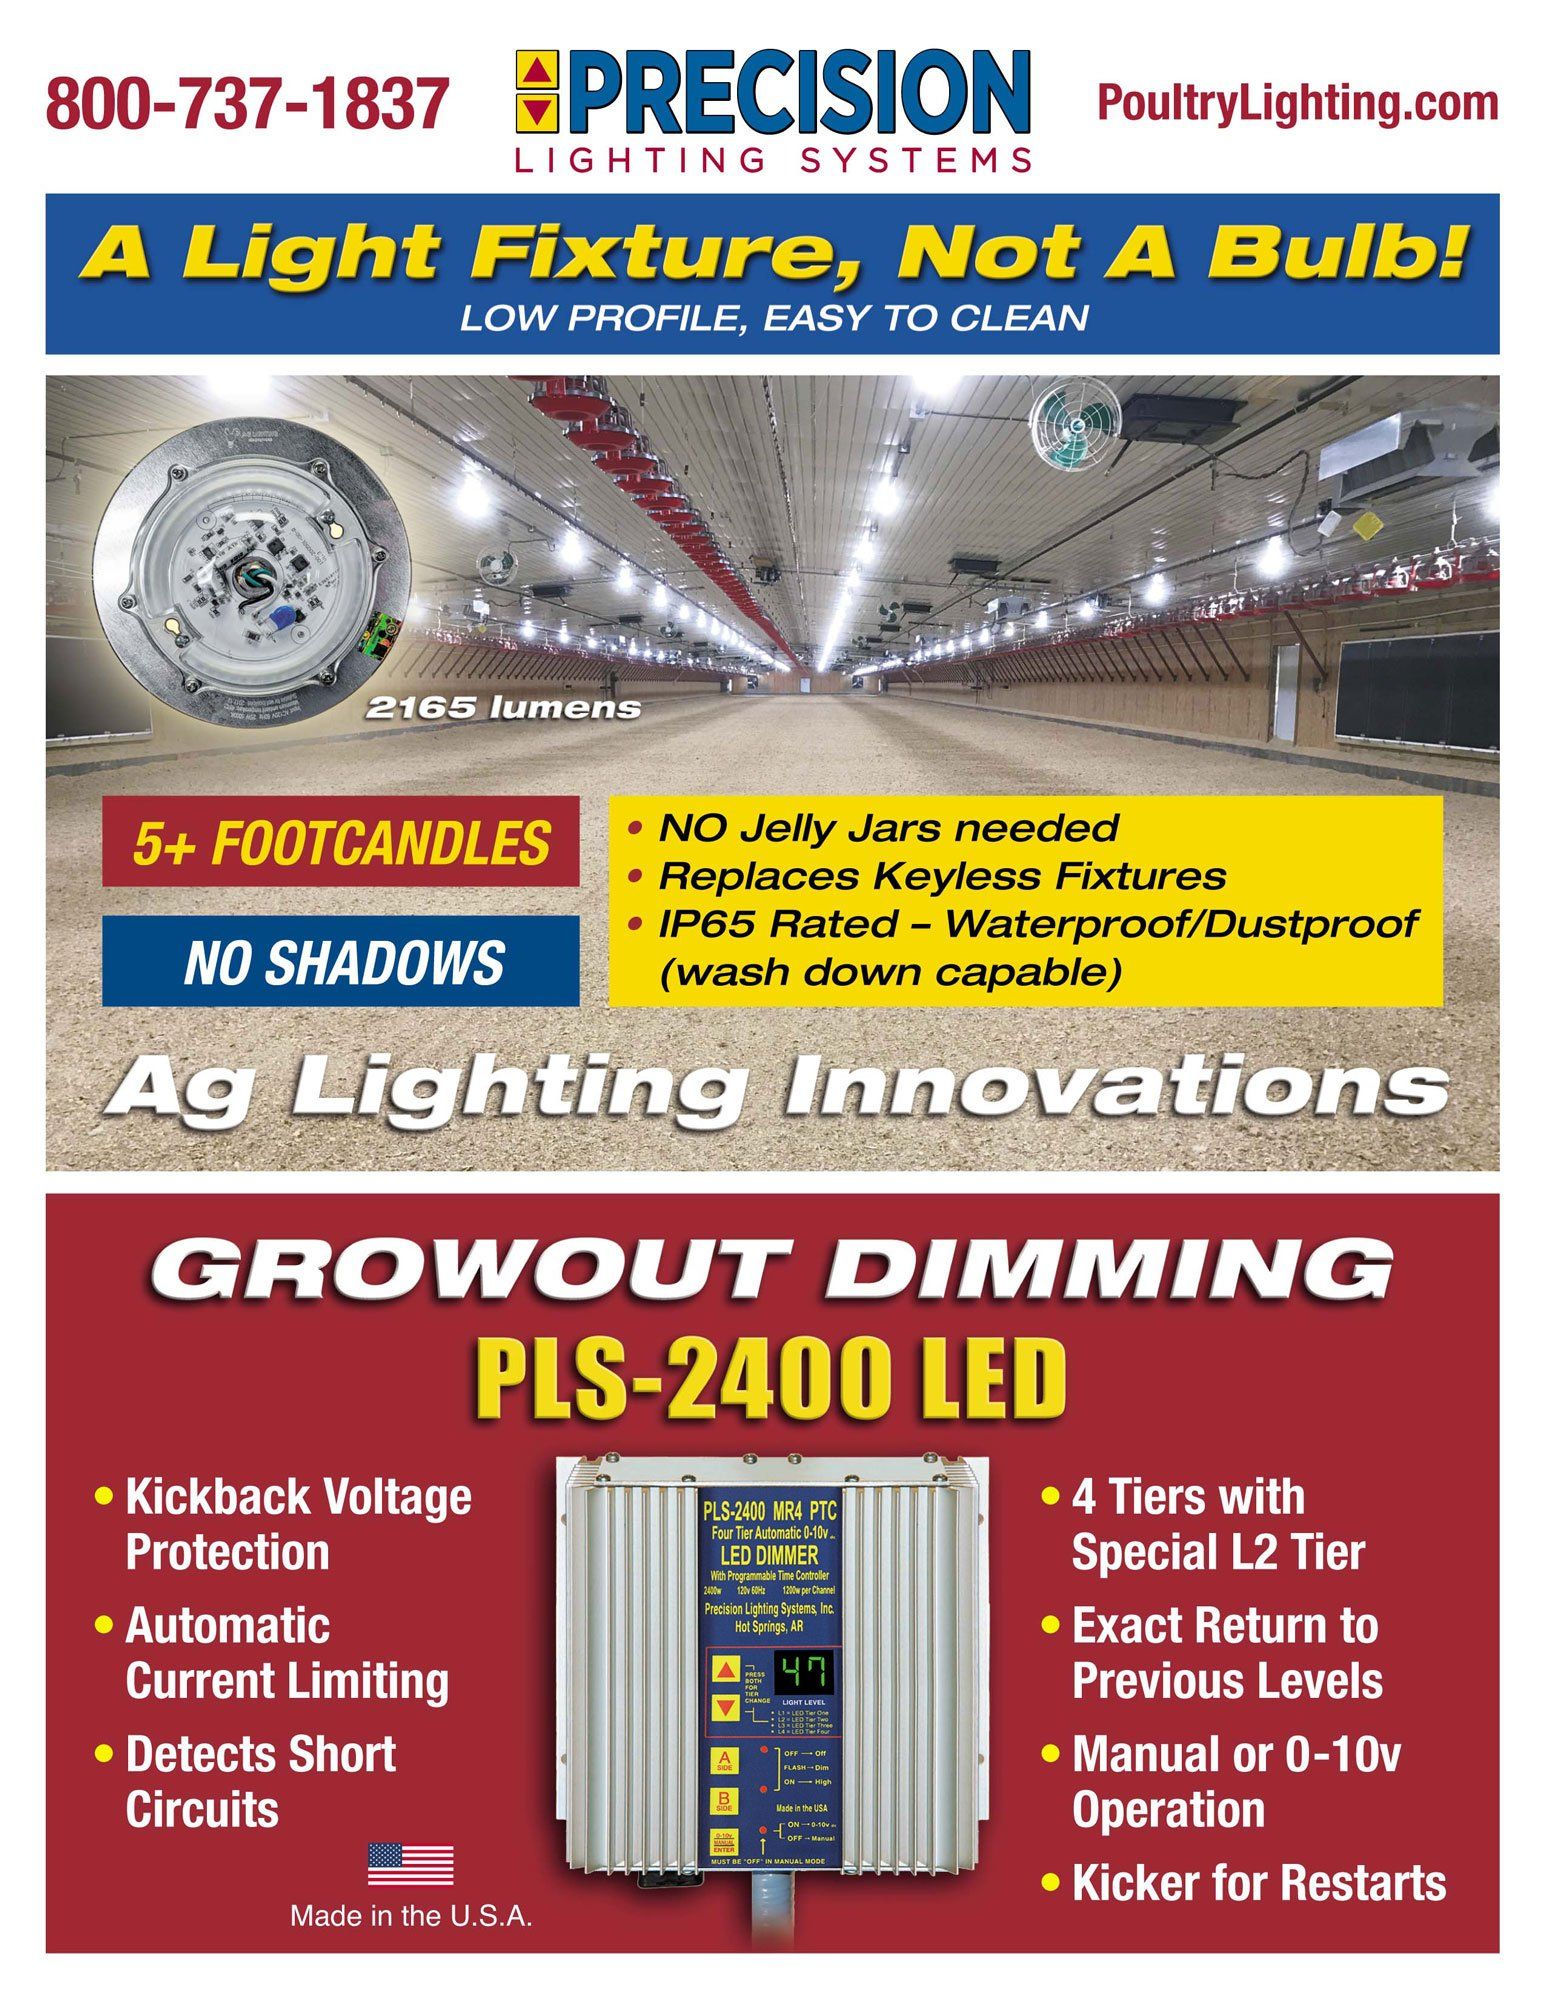 An advertisement for precision lighting systems shows a light fixture not a bulb